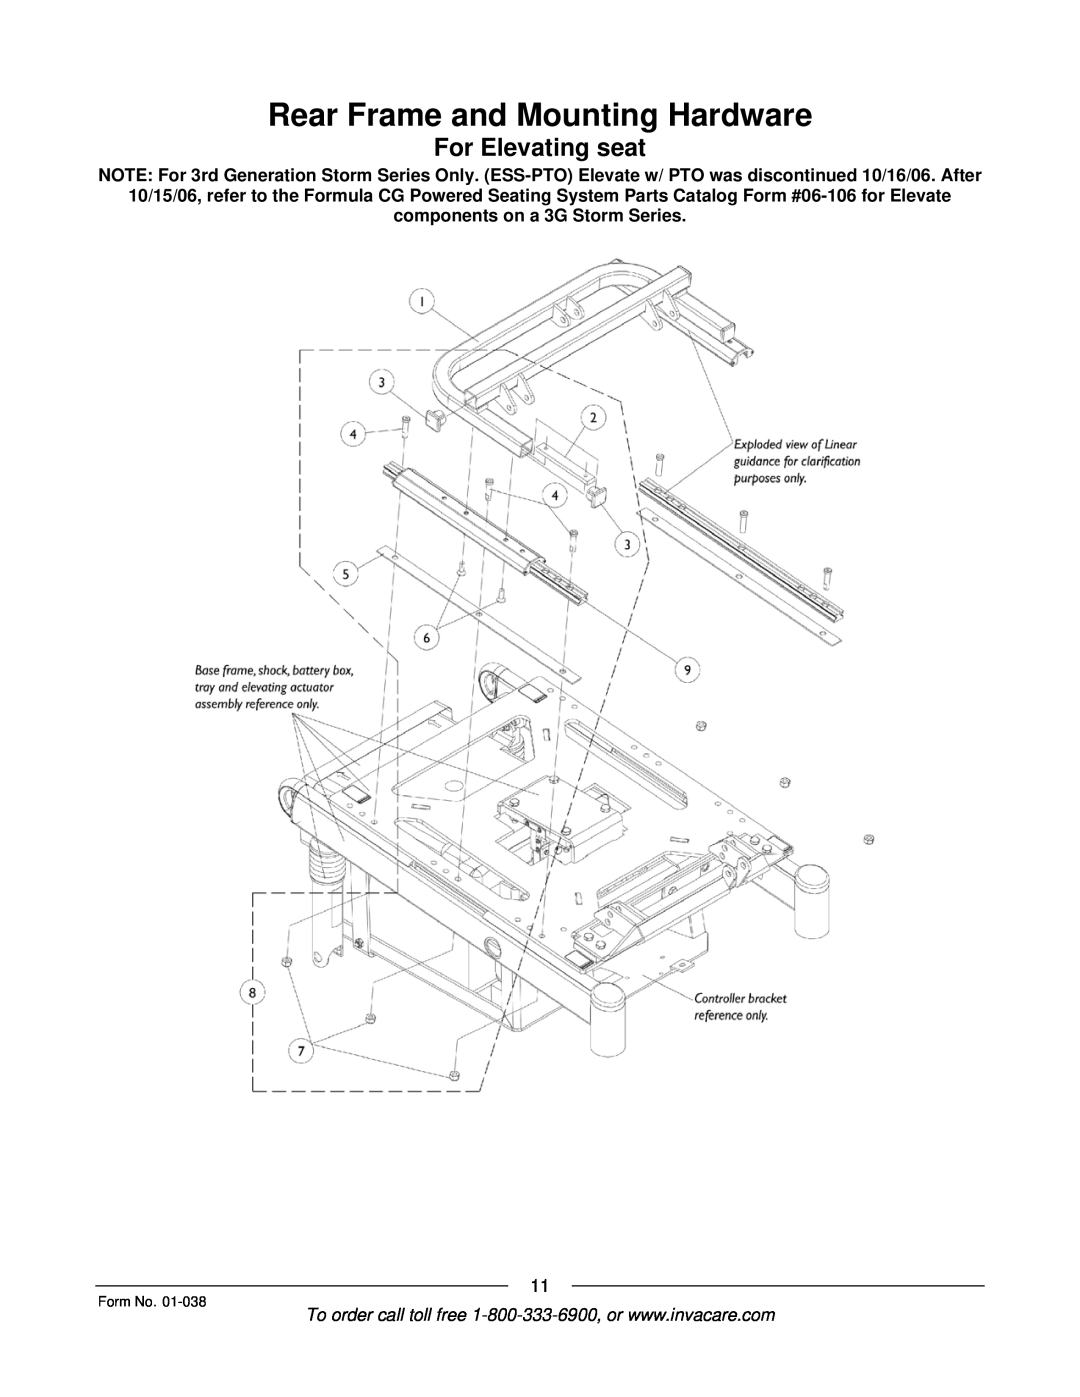 Invacare PTO-STM, ESS-PTO manual For Elevating seat, Rear Frame and Mounting Hardware 